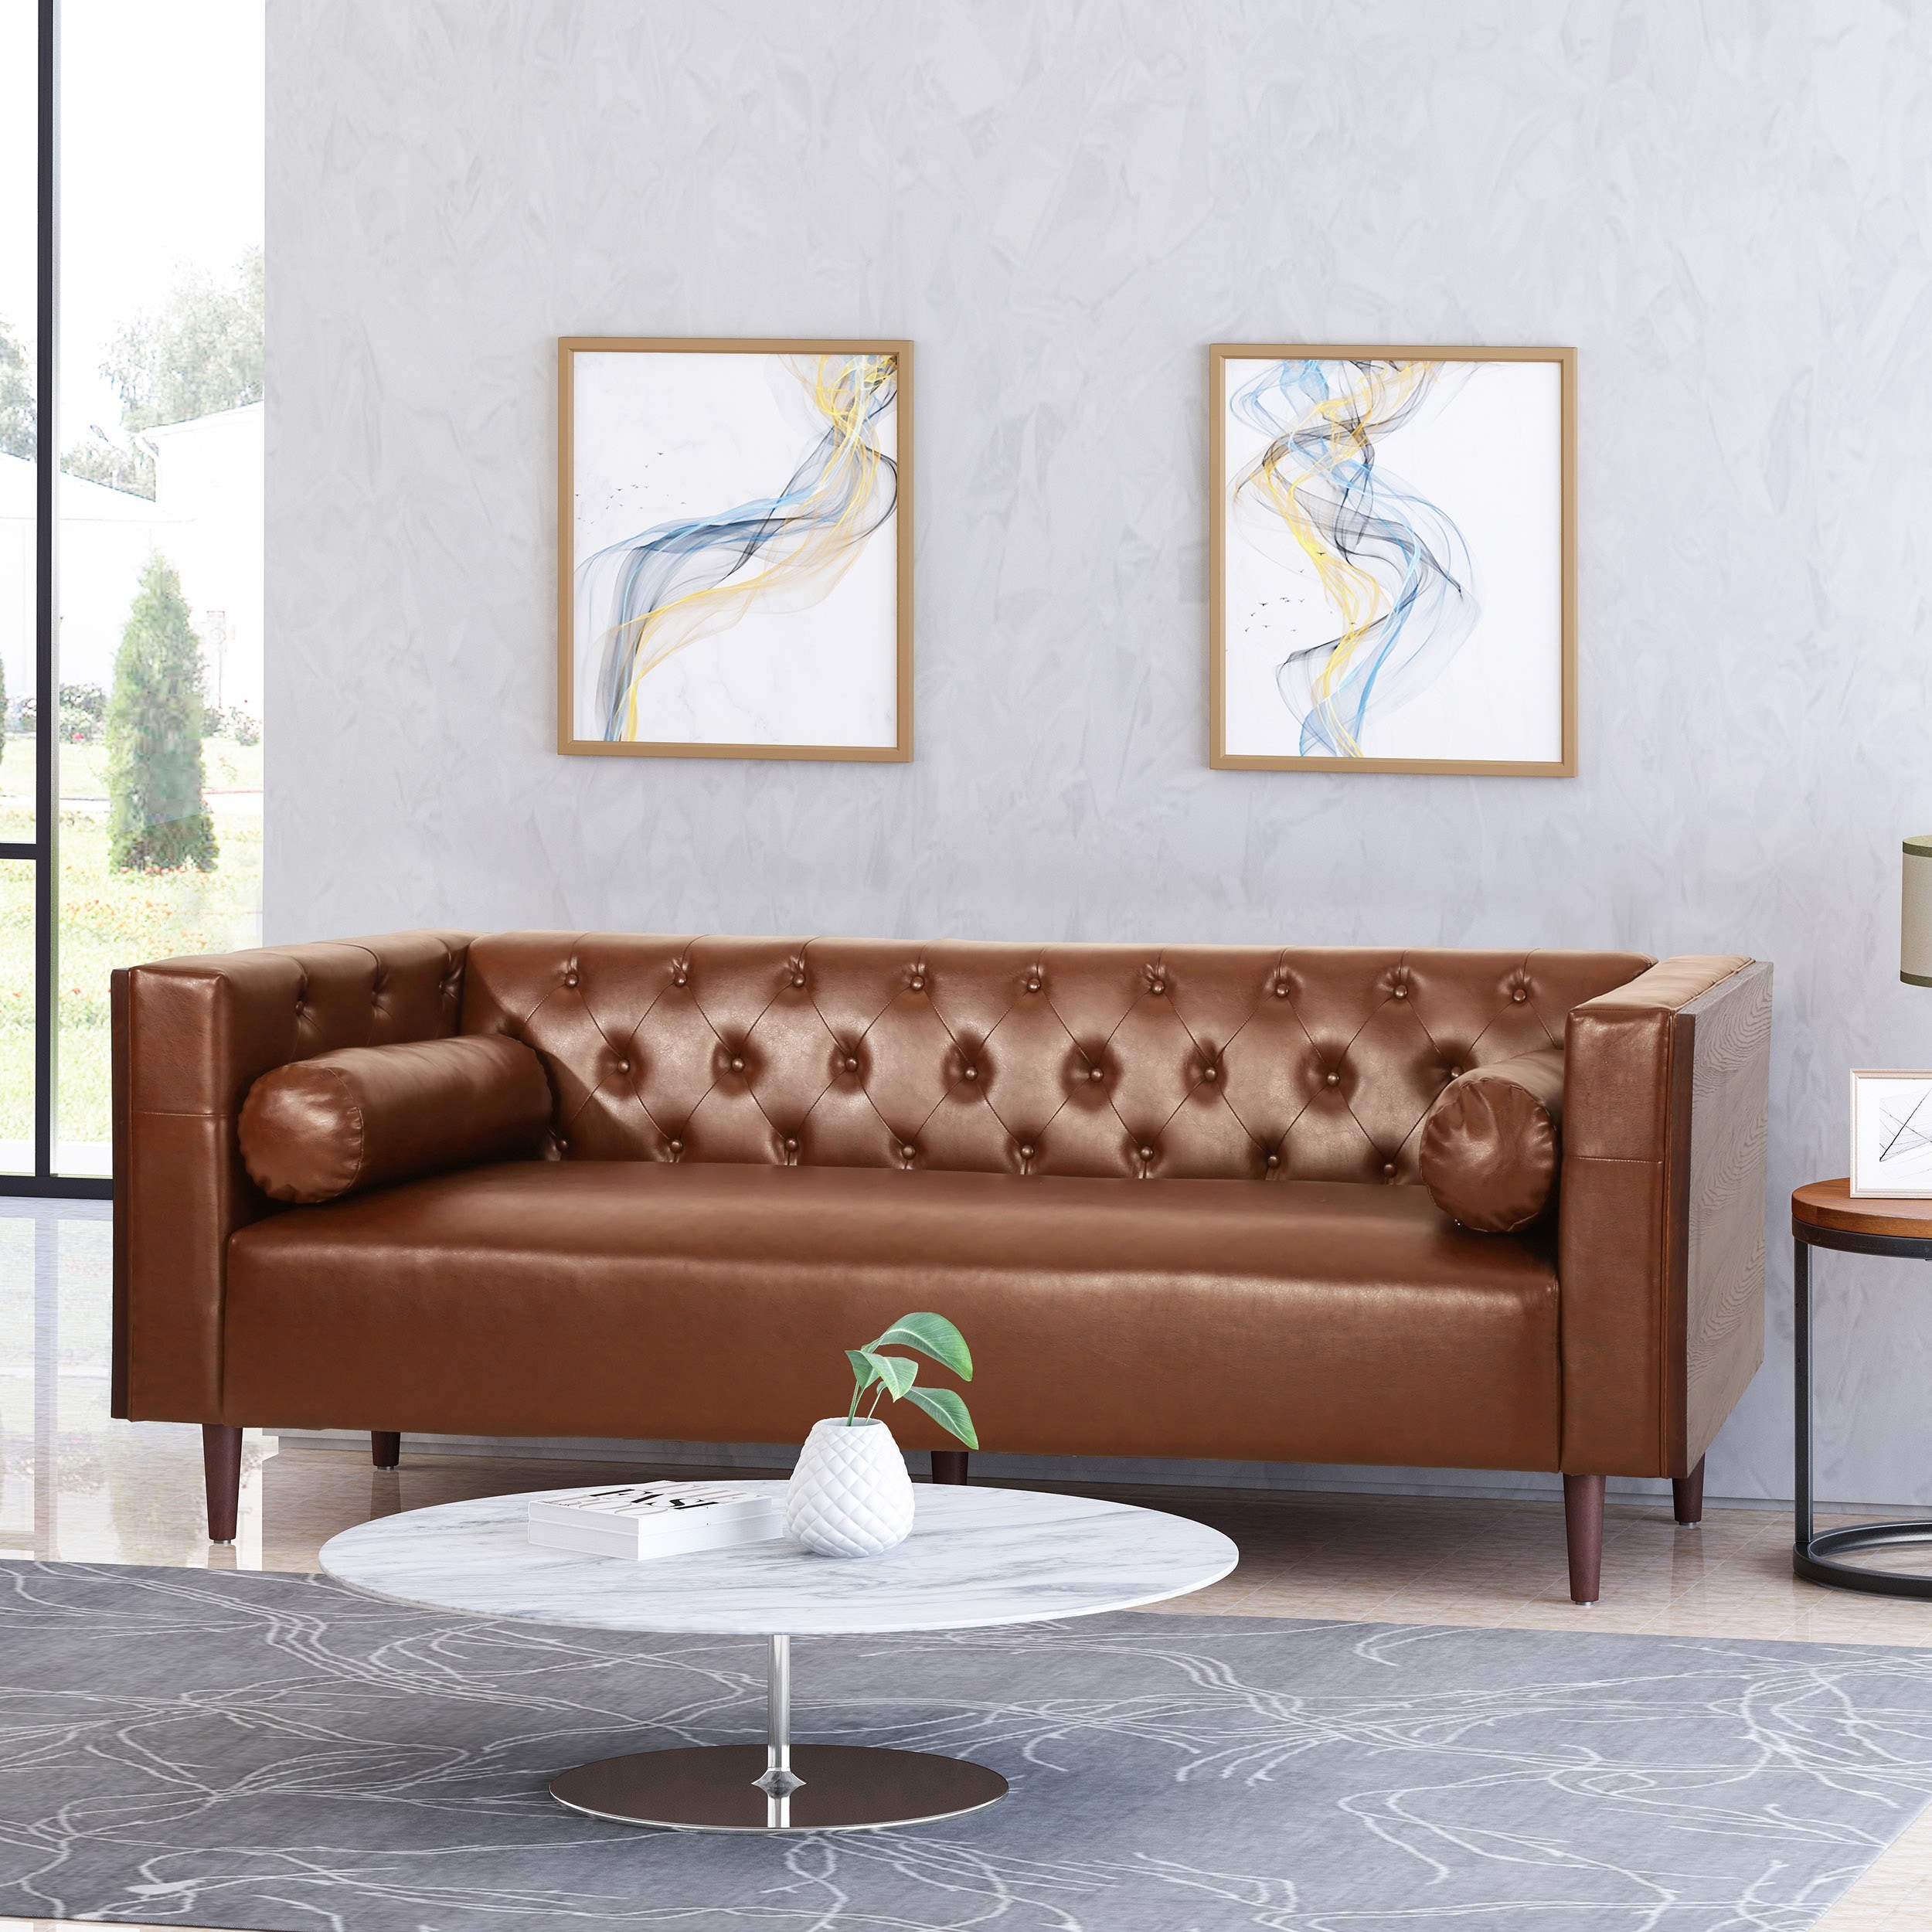 https://ak1.ostkcdn.com/images/products/is/images/direct/a1c1804f205eef5d26659f315c5fb544cfb01849/Faraway-Contemporary-Tufted-Deep-Seated-Sofa-with-Accent-Pillows-by-Christopher-Knight-Home.jpg